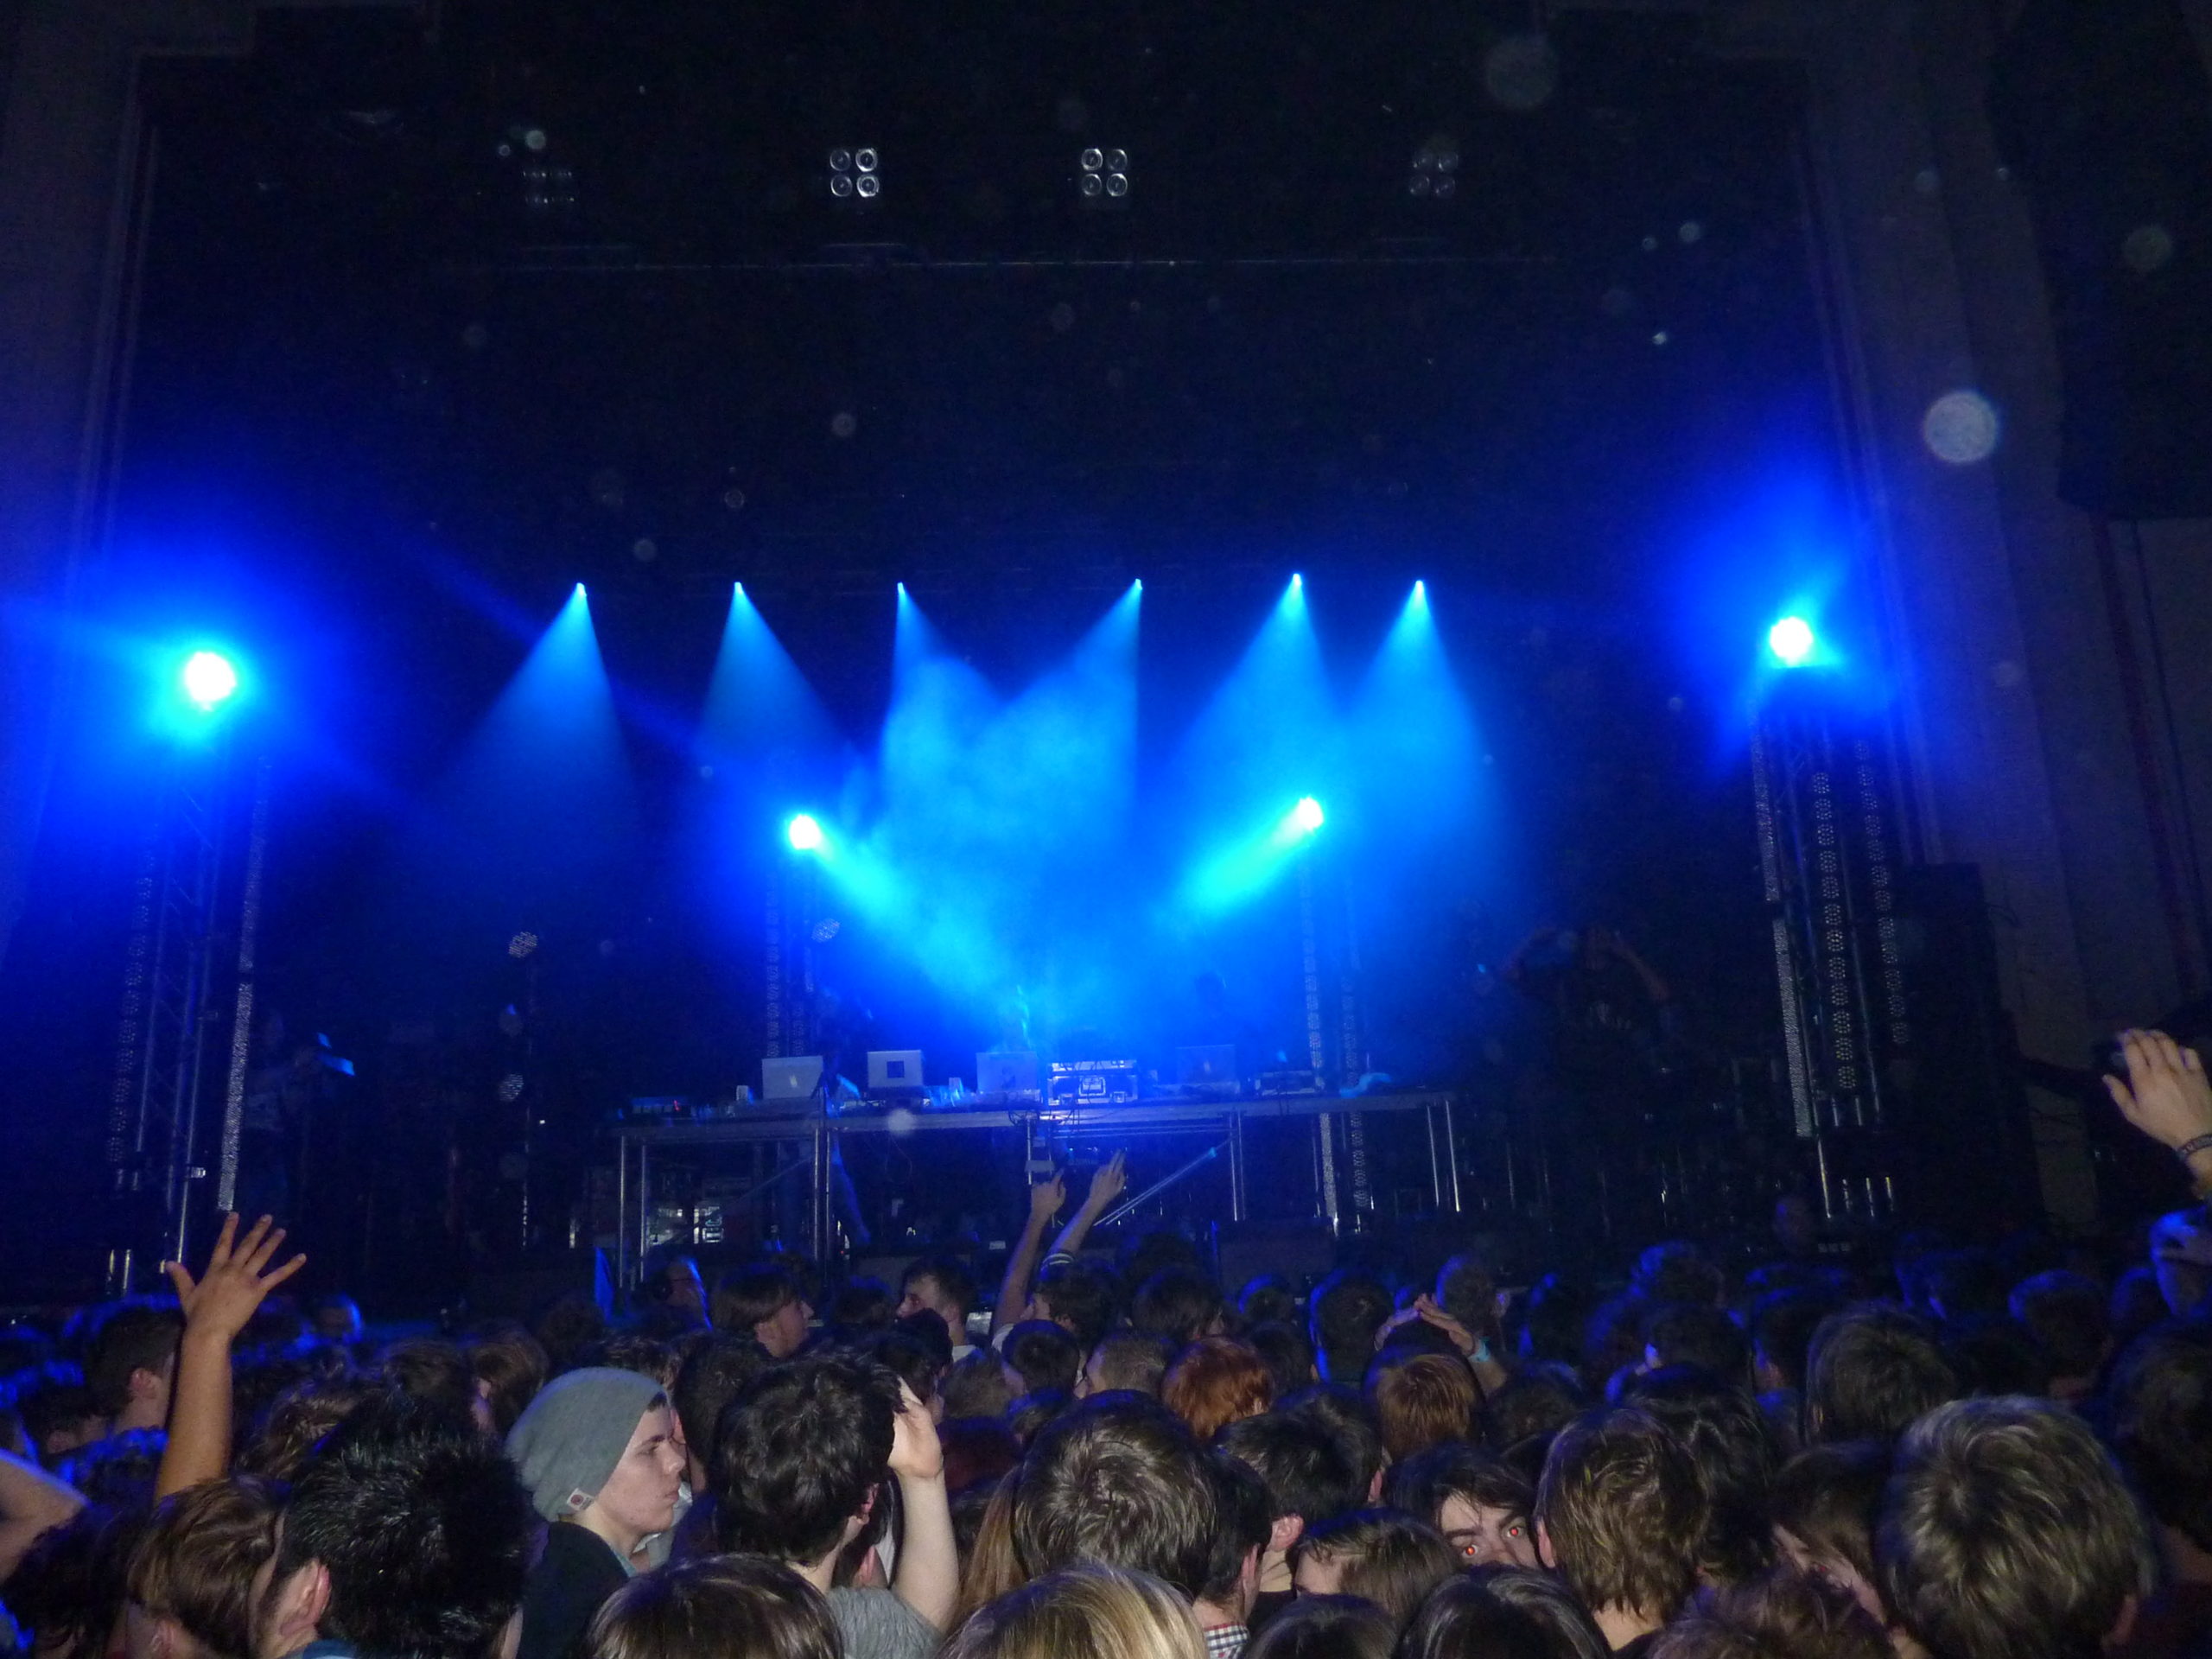 You are currently viewing NME Tour 2011 @ O2 Academy